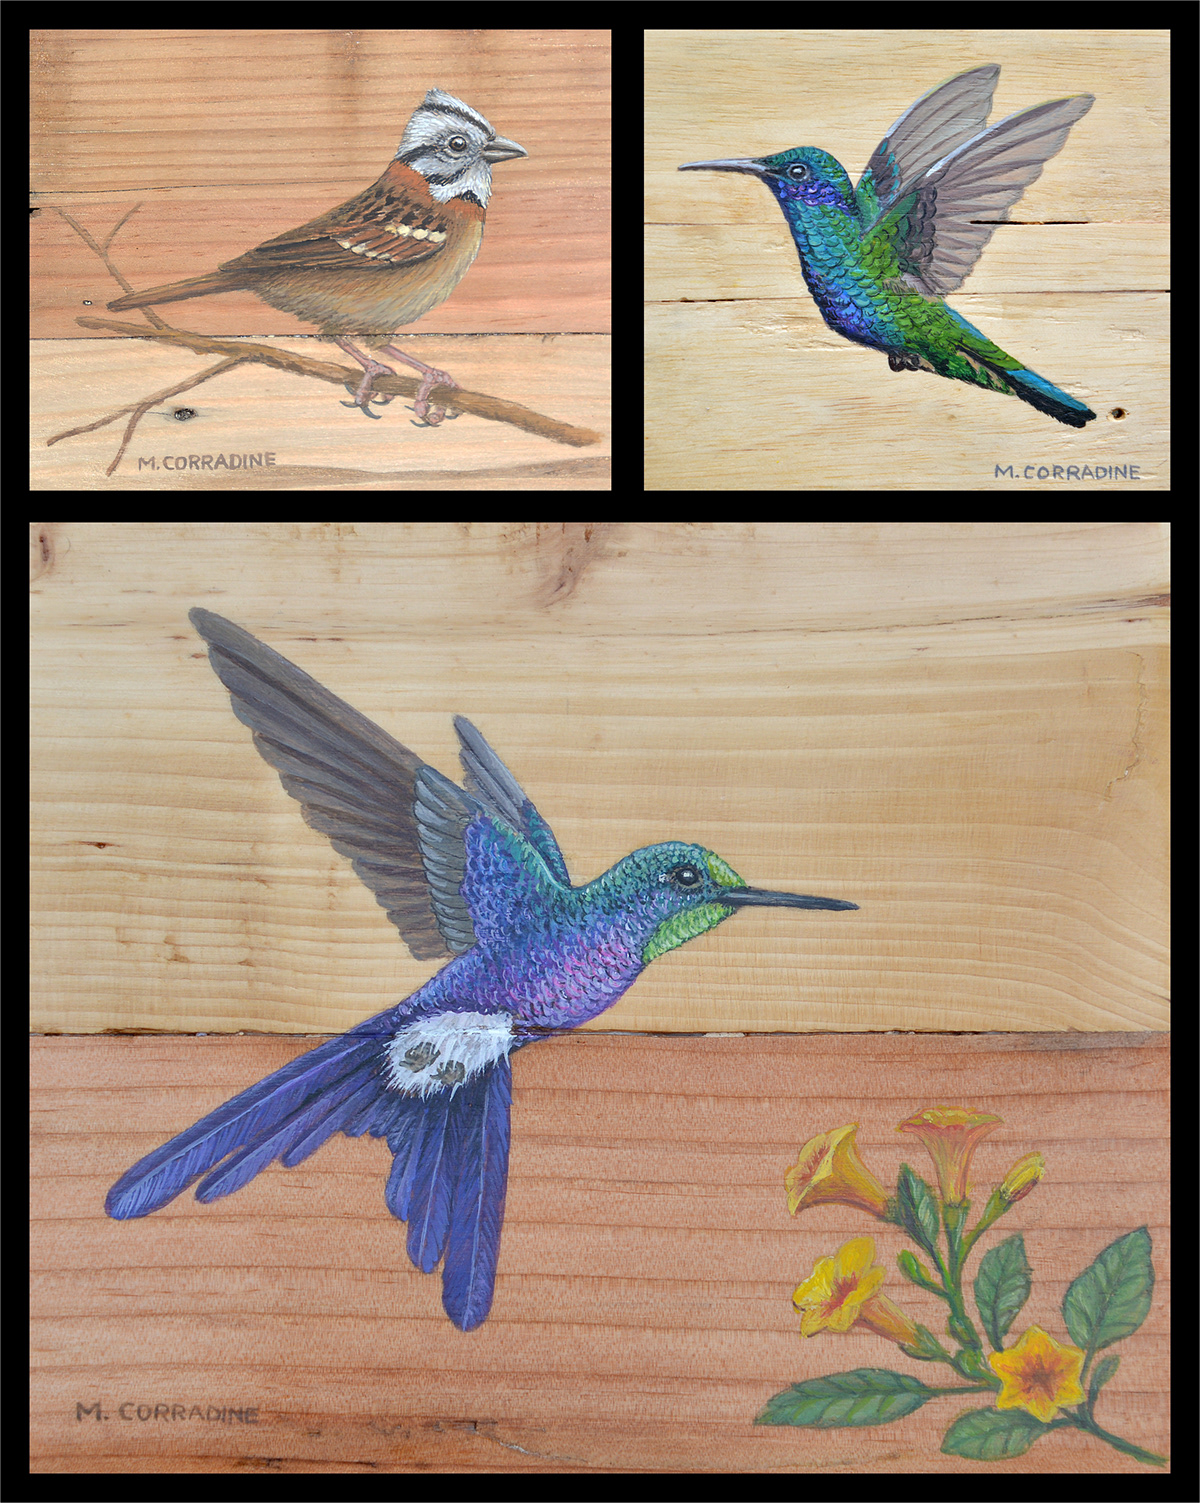 wood acrylic birds art colombia rustic recycling ornithology scientific wildlife